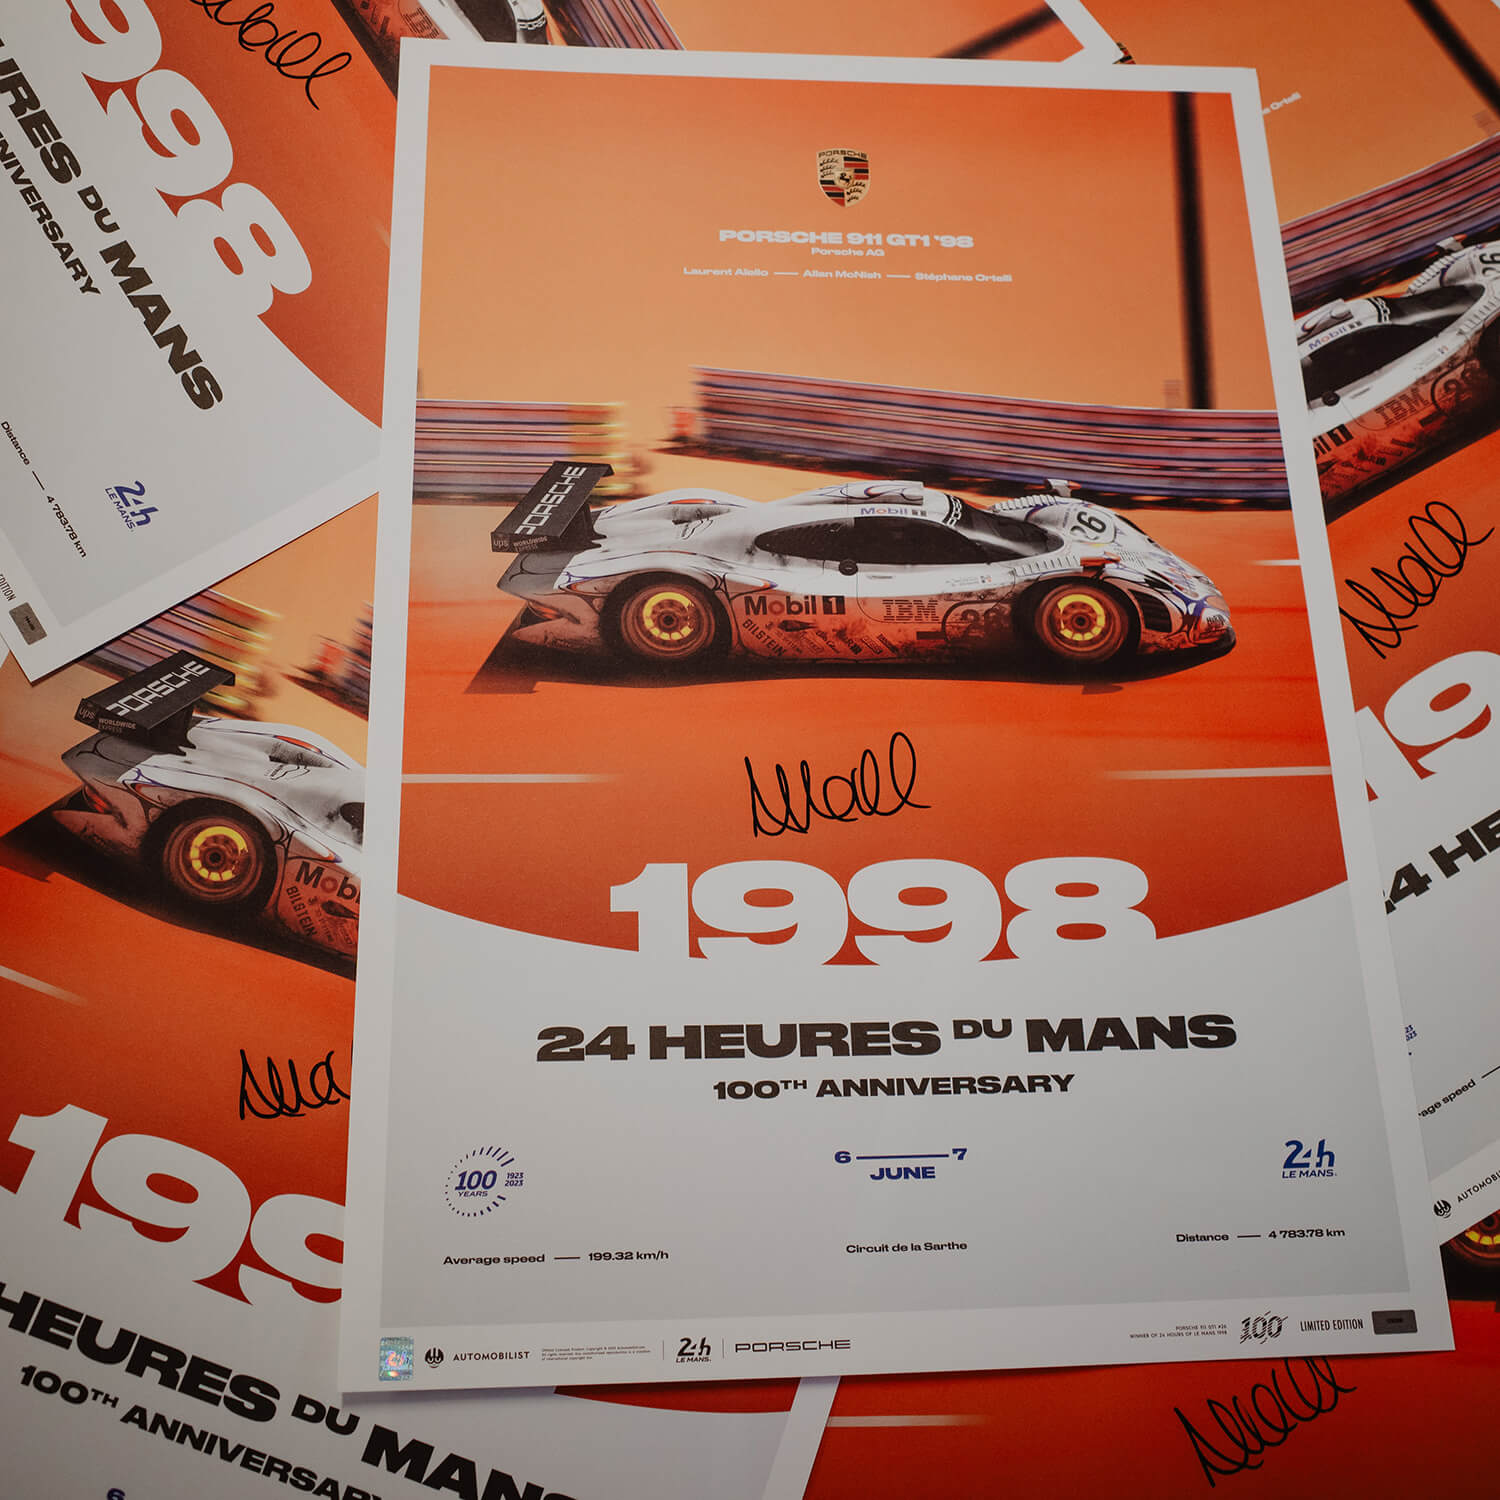 Signed by Allan McNish - Porsche 911 GT1 - 24h Le Mans - 100th Anniversary - 1998